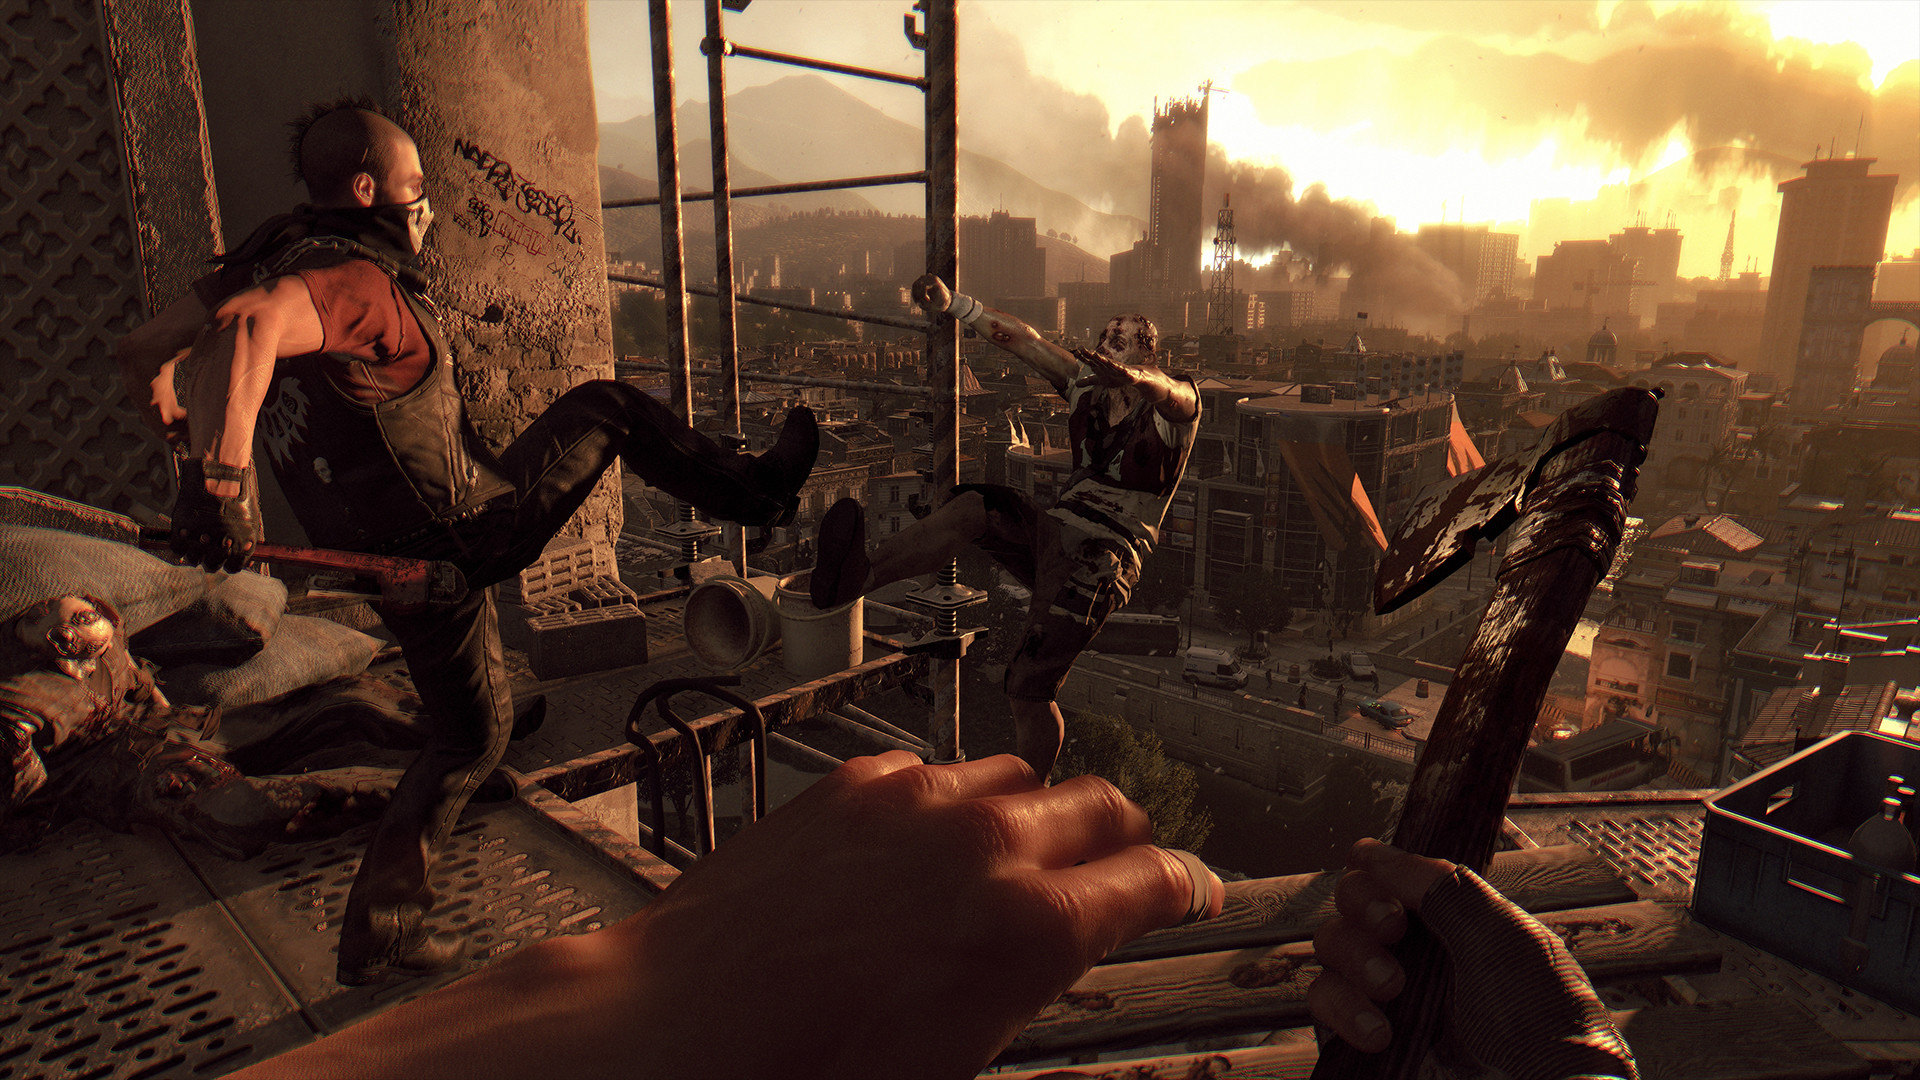 Save 70% on Dying Light Steam